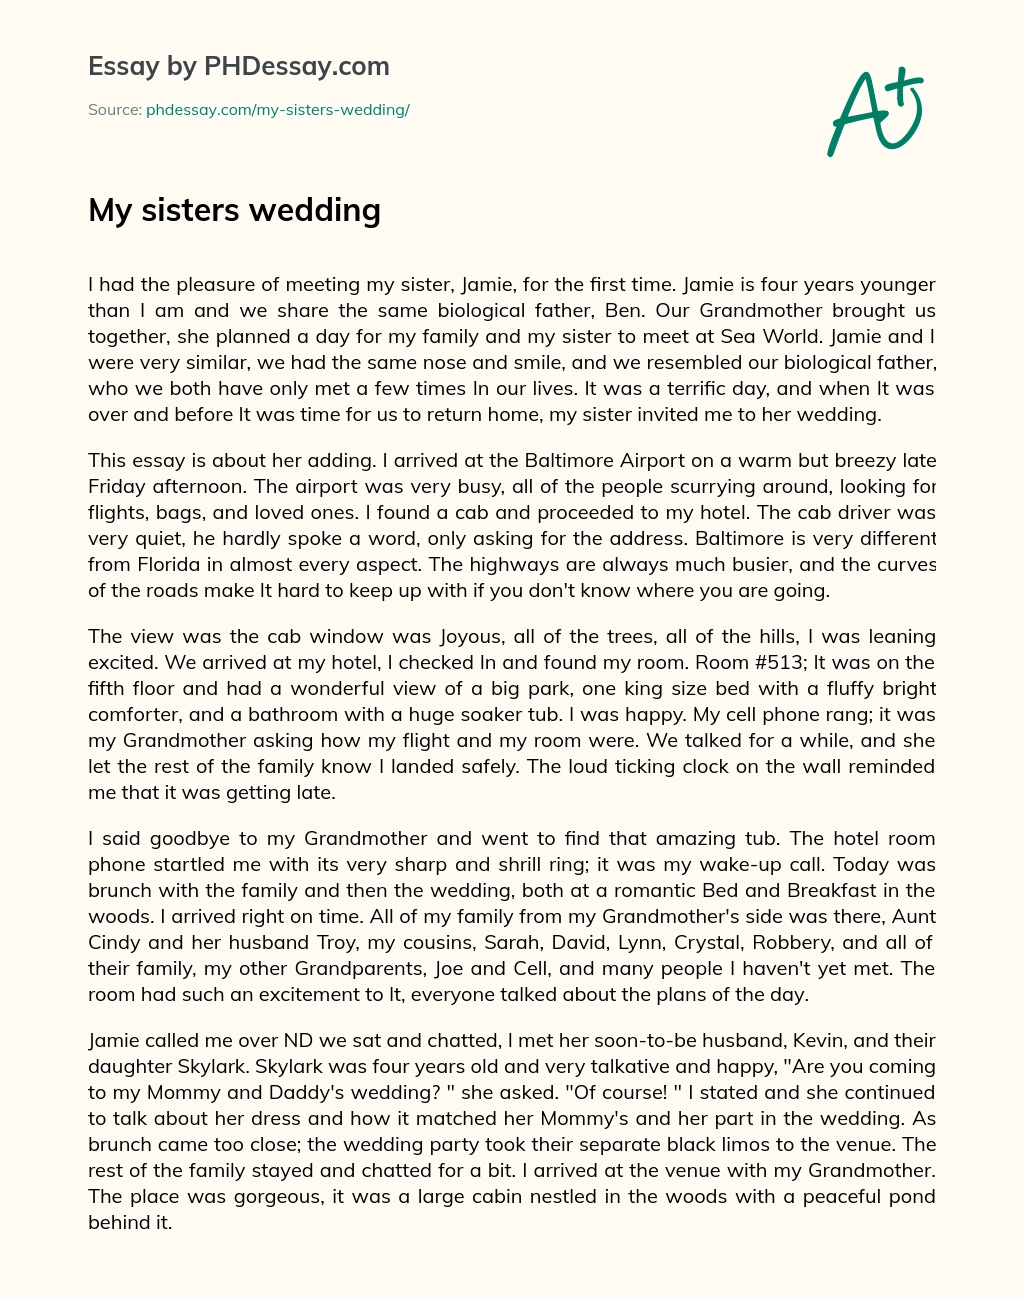 essay about wedding day